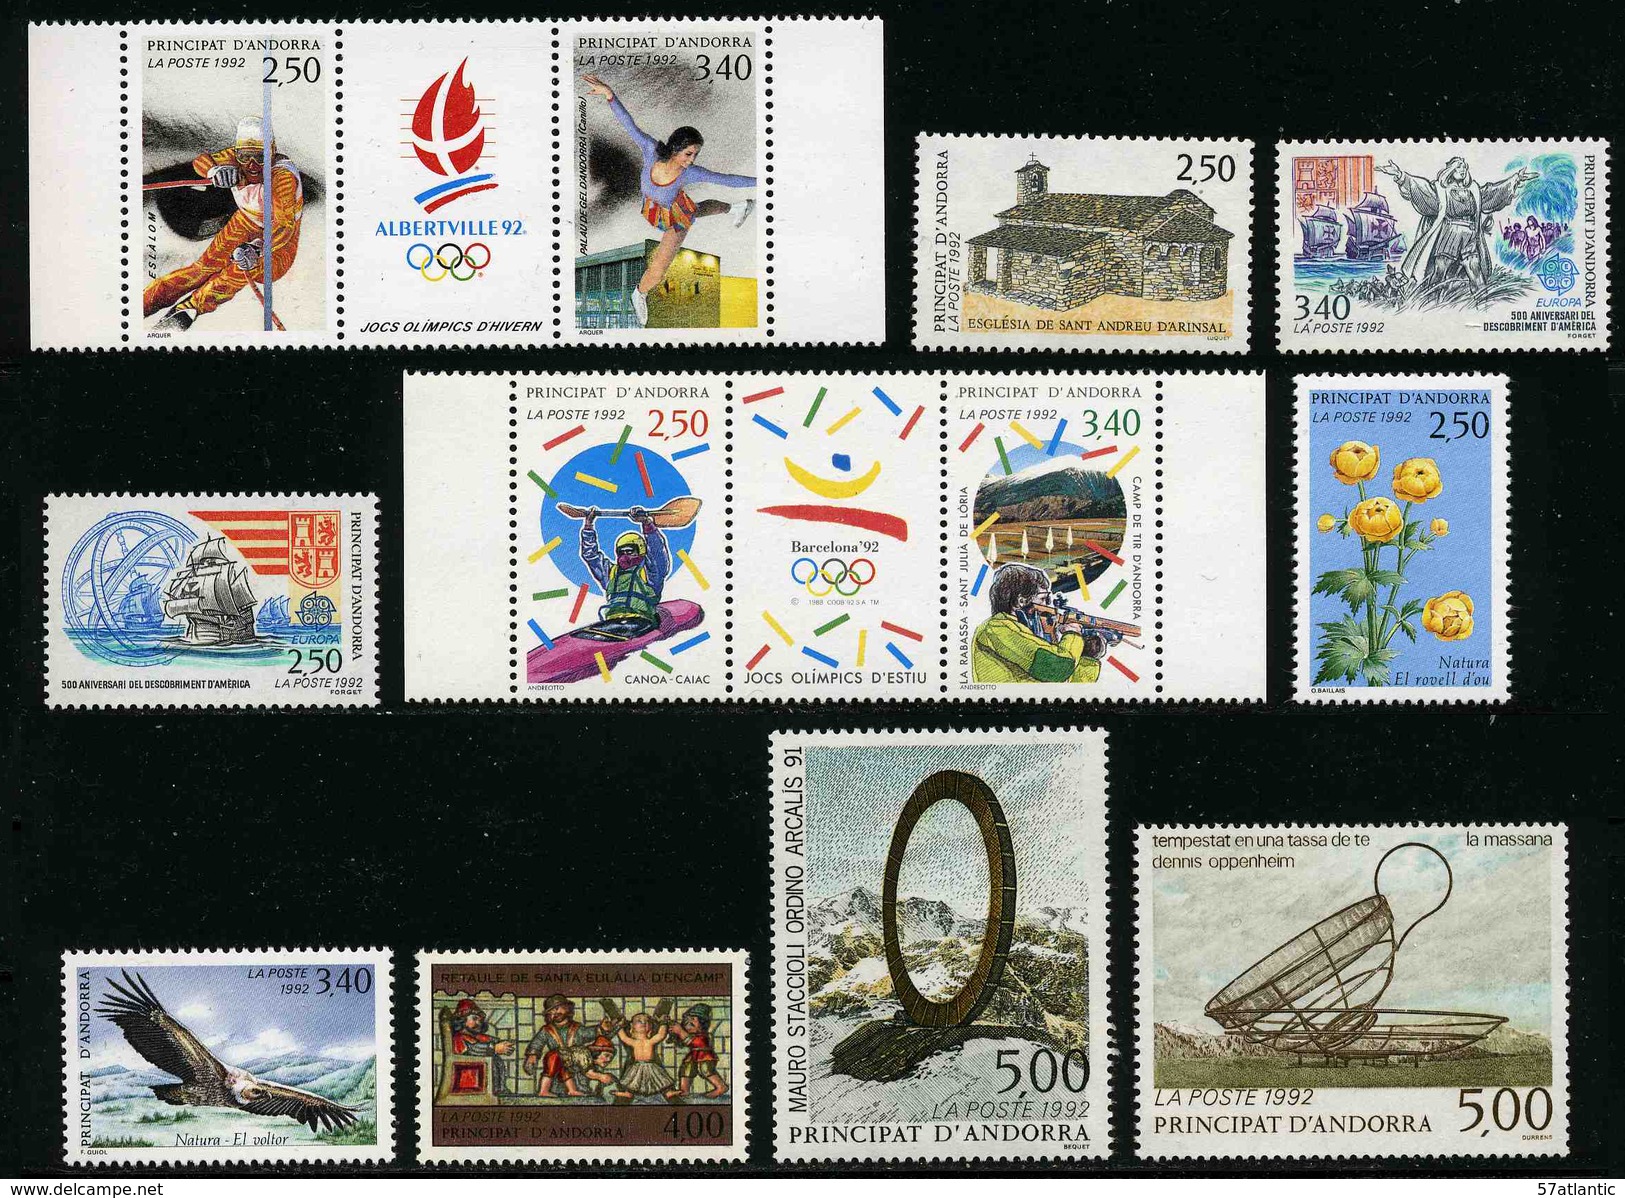 ANDORRE FRANCAIS - ANNEE COMPLETE 1992 - YT 414A à 424 ** -  TIMBRES NEUFS ** - Volledige Jaargang